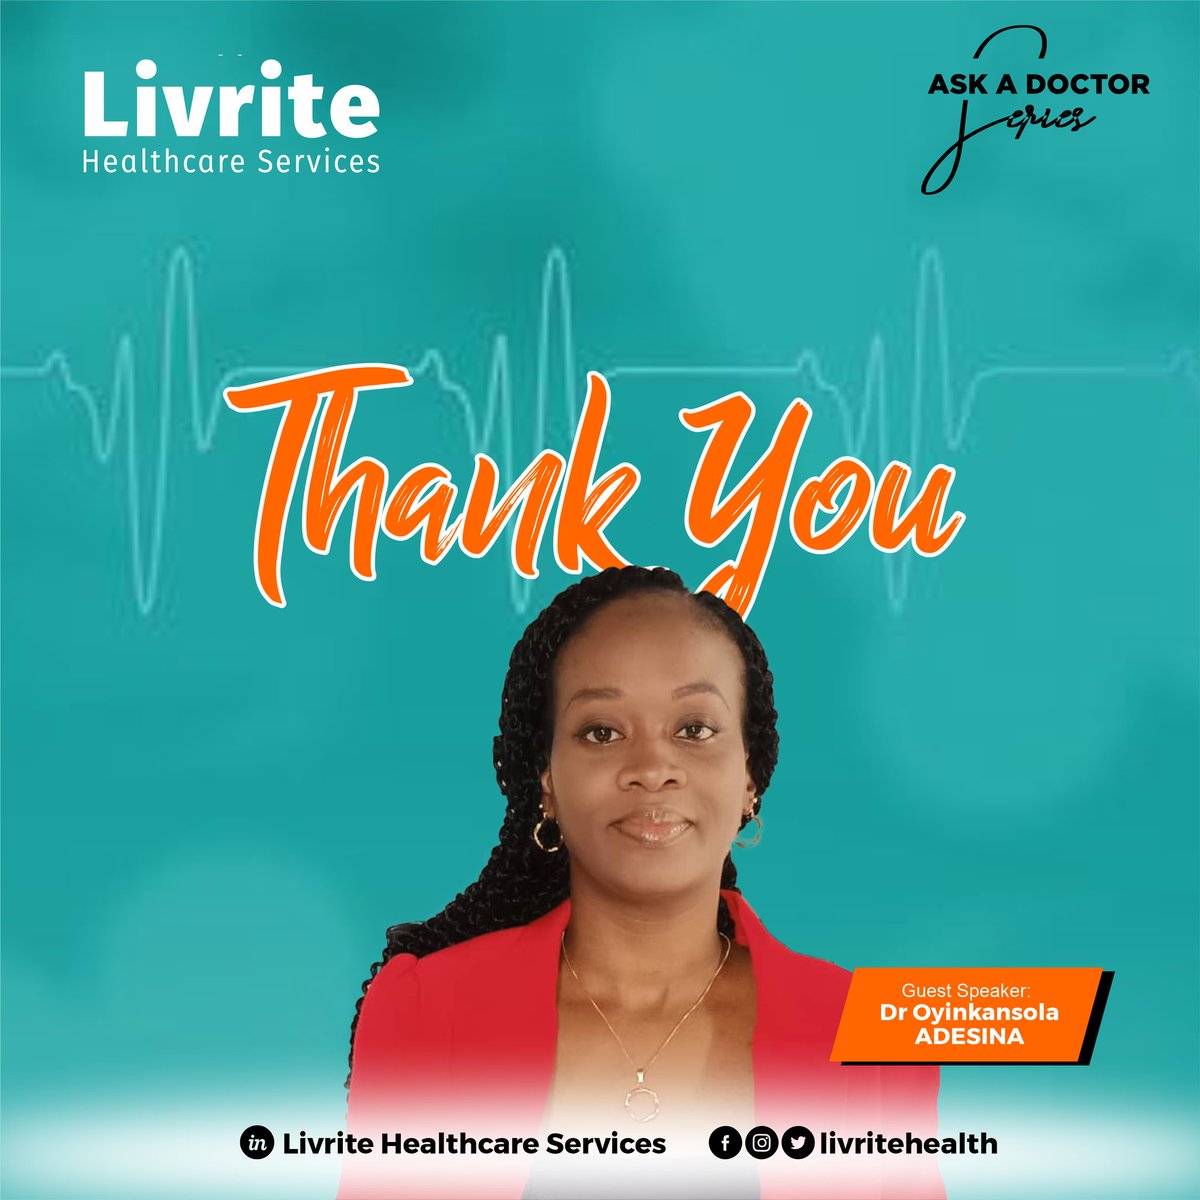 Thank you for your share of knowledge💚 
#healthcareforall 
#healthcare 
#livritehealthcare👩🏻‍⚕️🌍👨🏻‍⚕️ 
#askadoctorseries 
#askadoctor